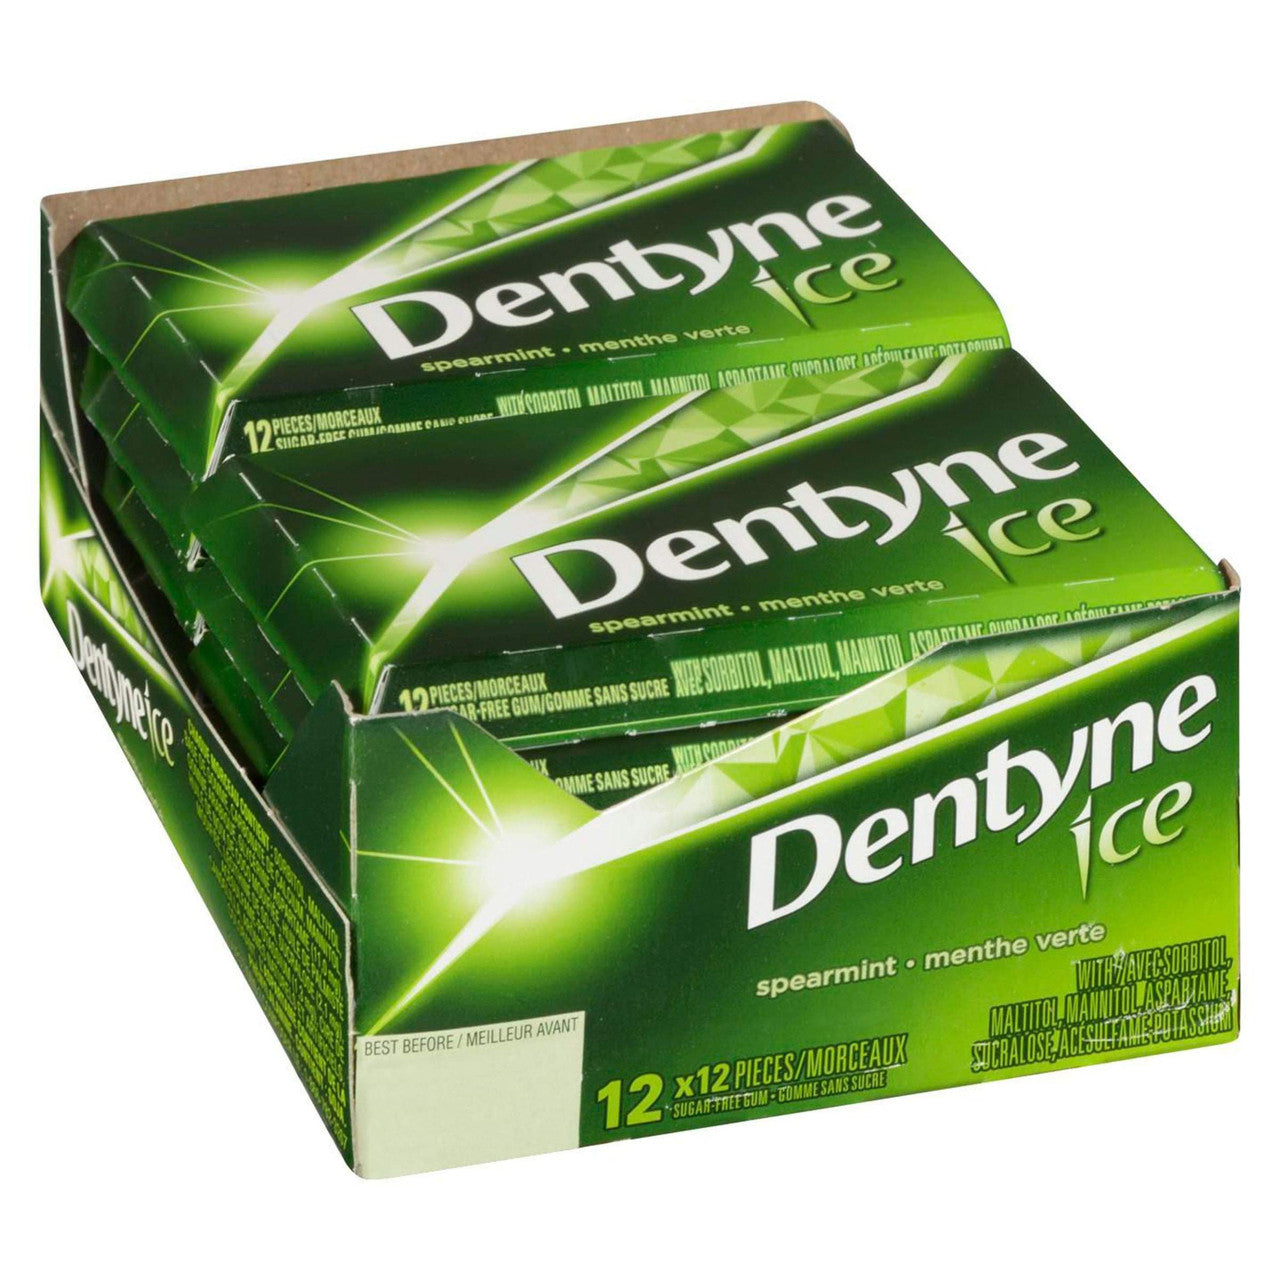 Dentyne Ice Bubble Gum, Spearmint, 12 Count {Imported from Canada}